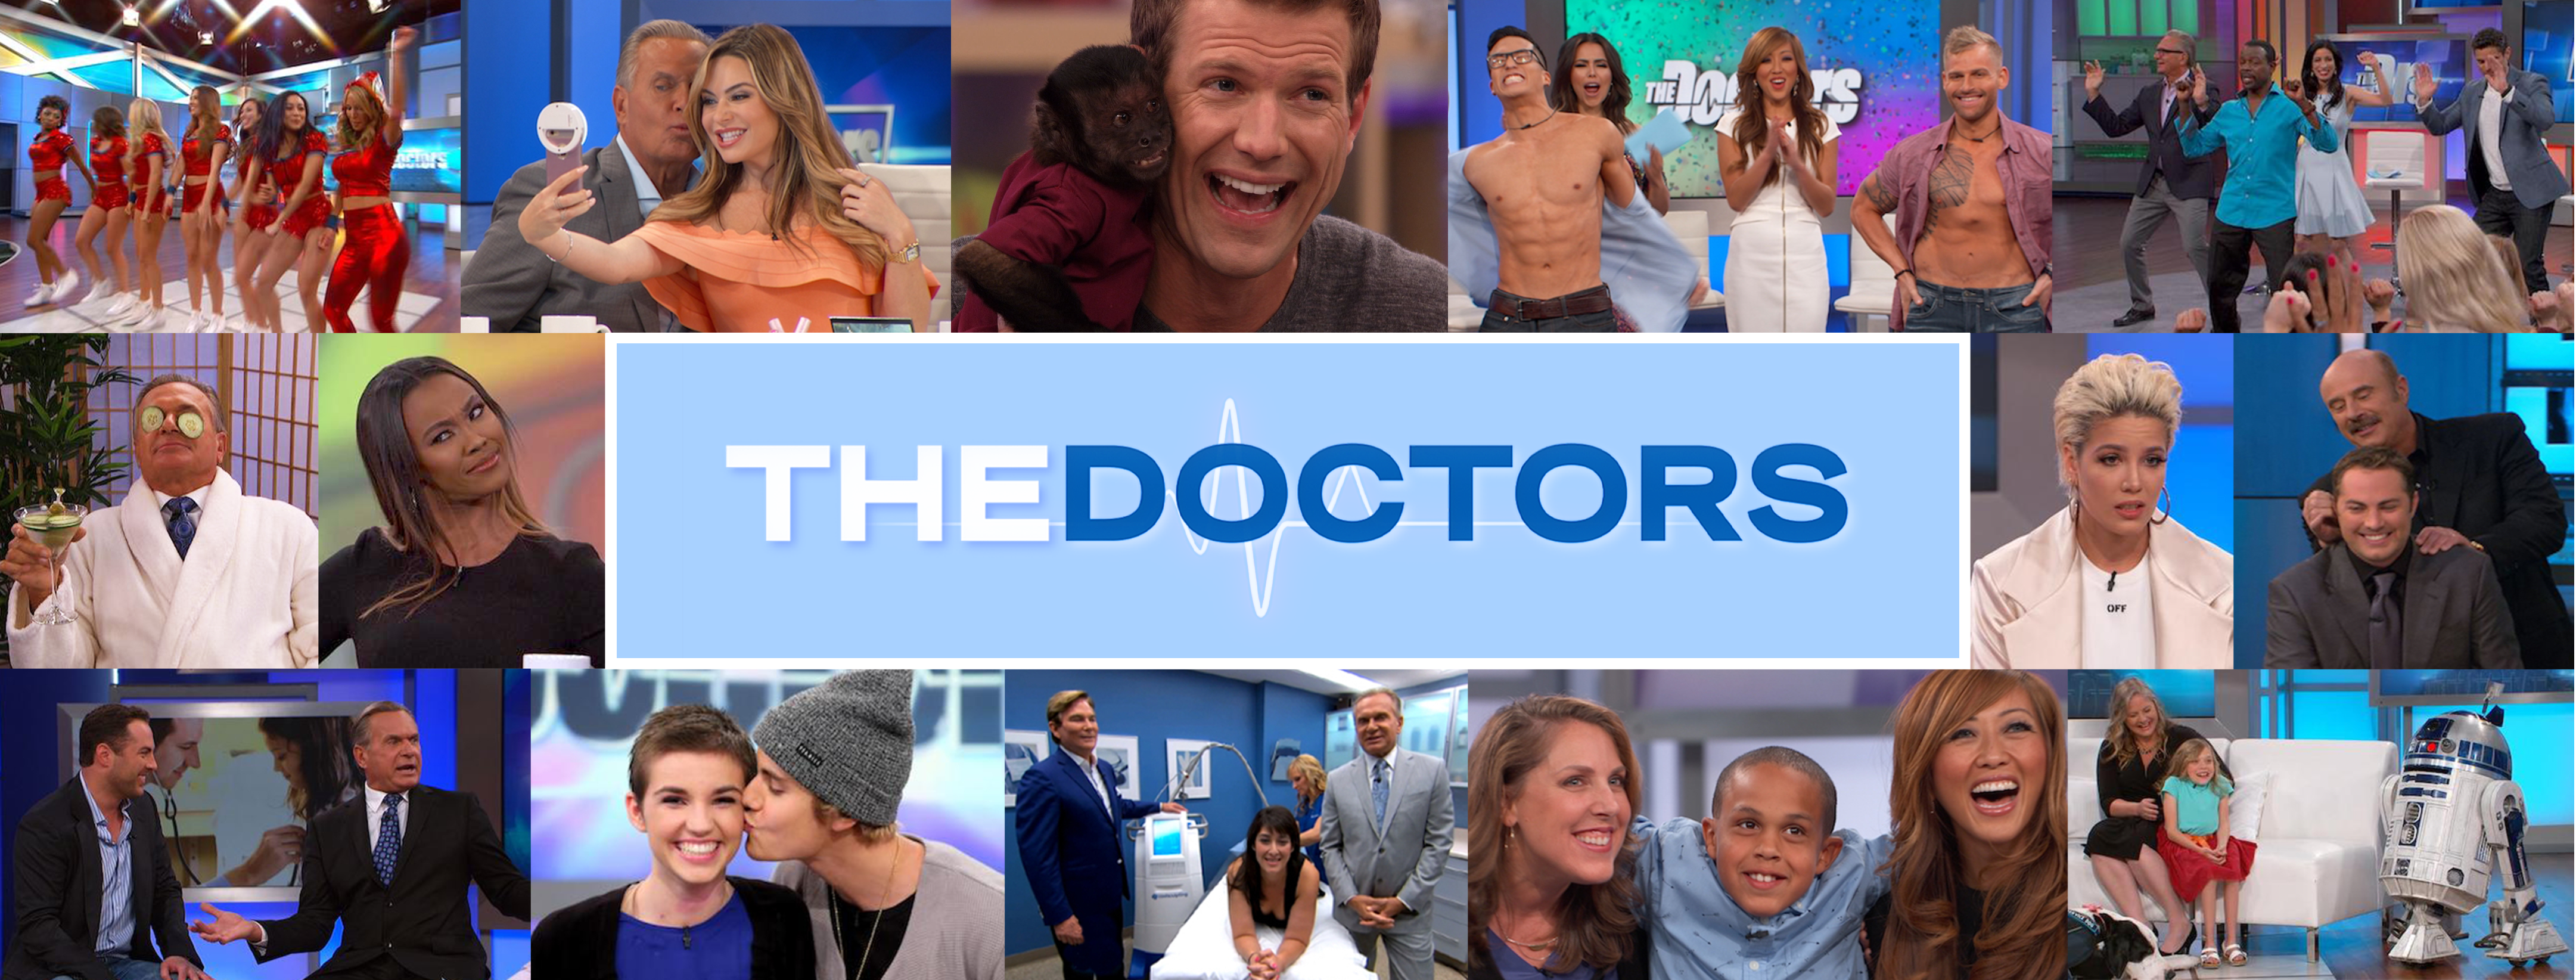 What Is Happening with Pop Star Britney Spears' Conservatorship? | The Doctors TV Show